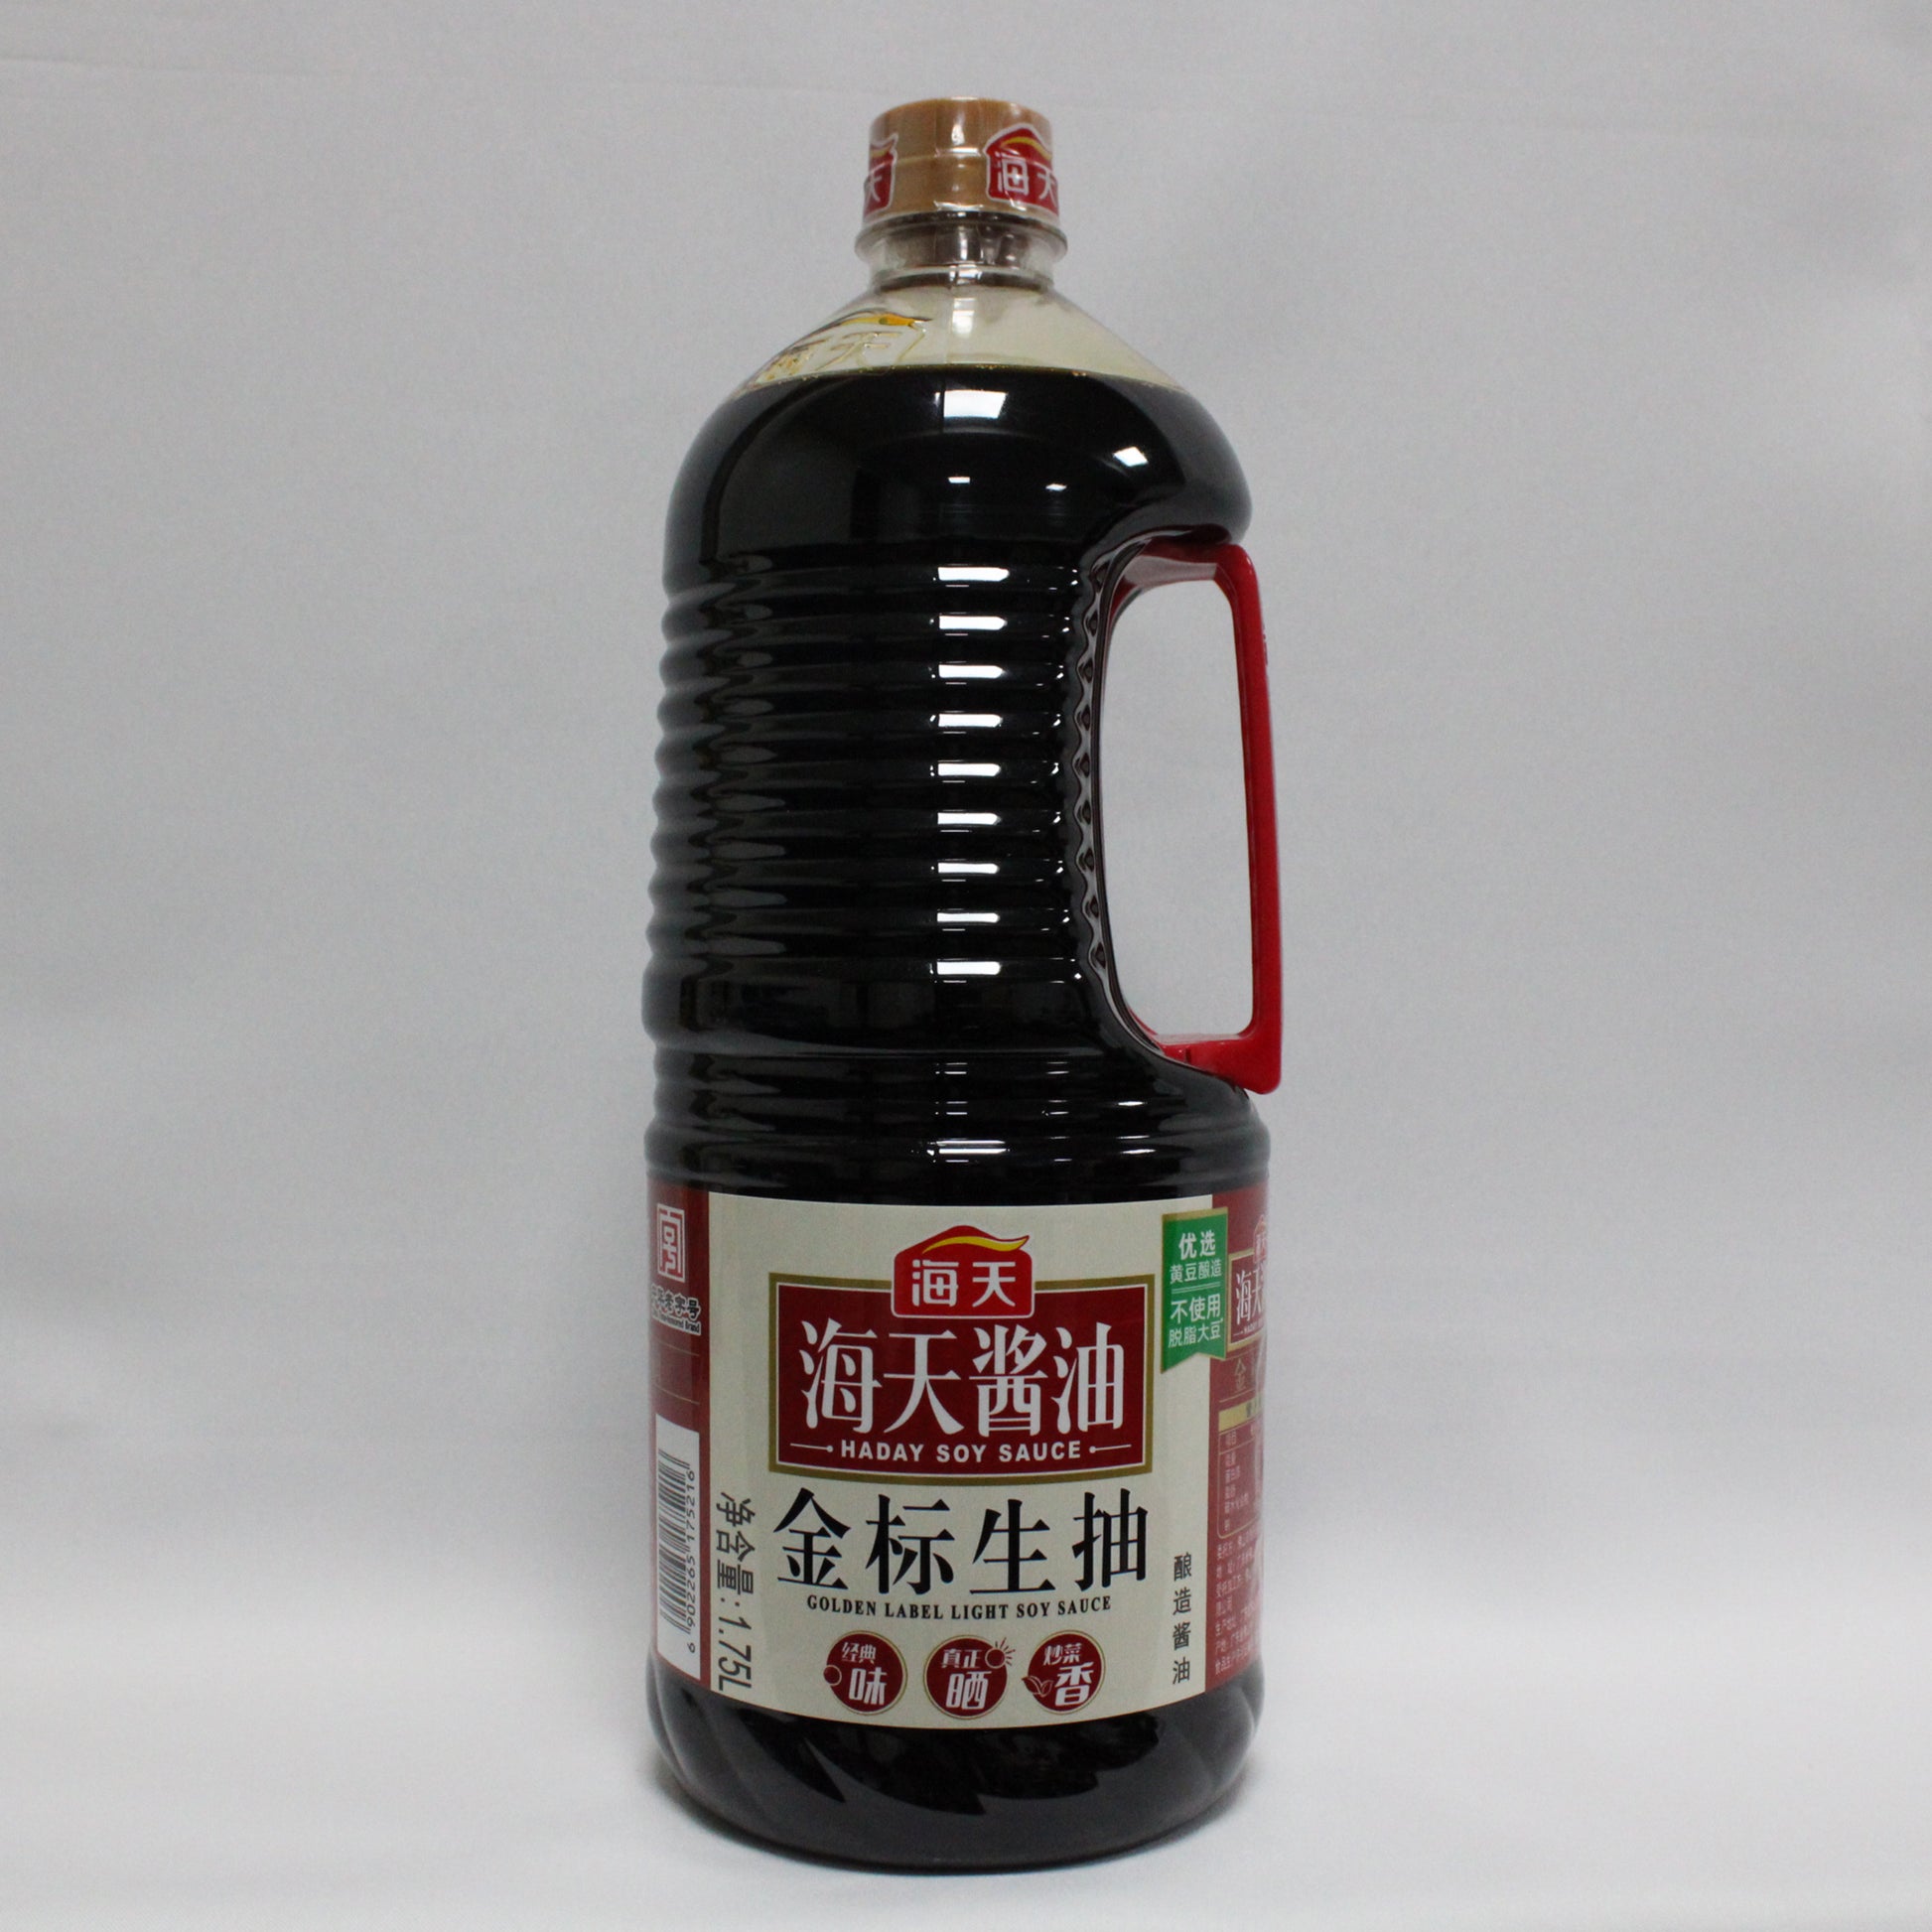 Superior Light Soy Sauce - Haday - 500ml